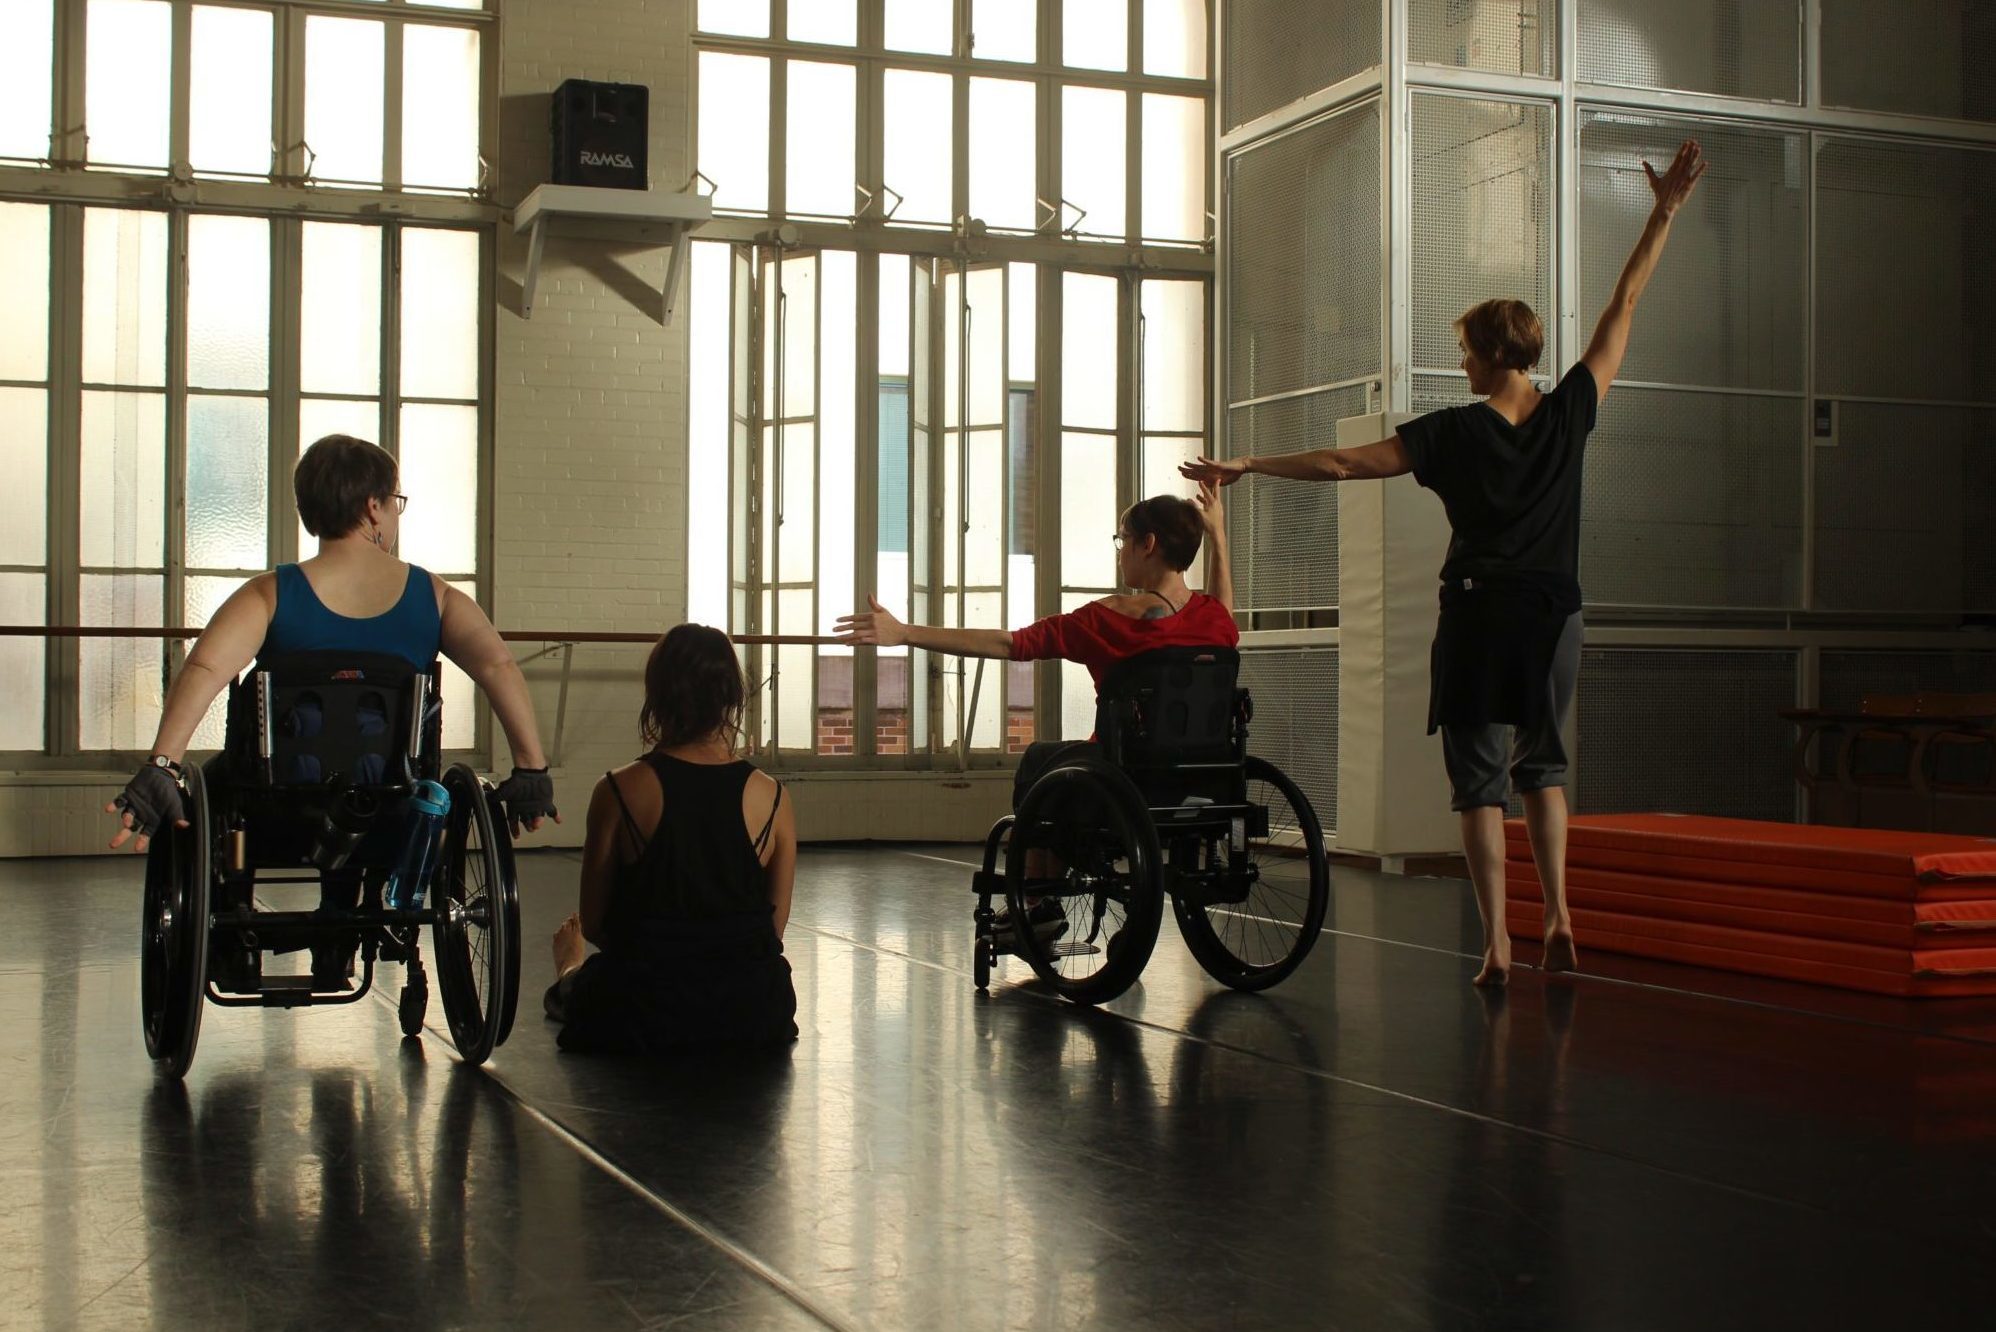 four dancers with and without disabilities positioned side by side face away from the camera. two dancers on the left have one arm reaching up and the other arm stretched to the side.